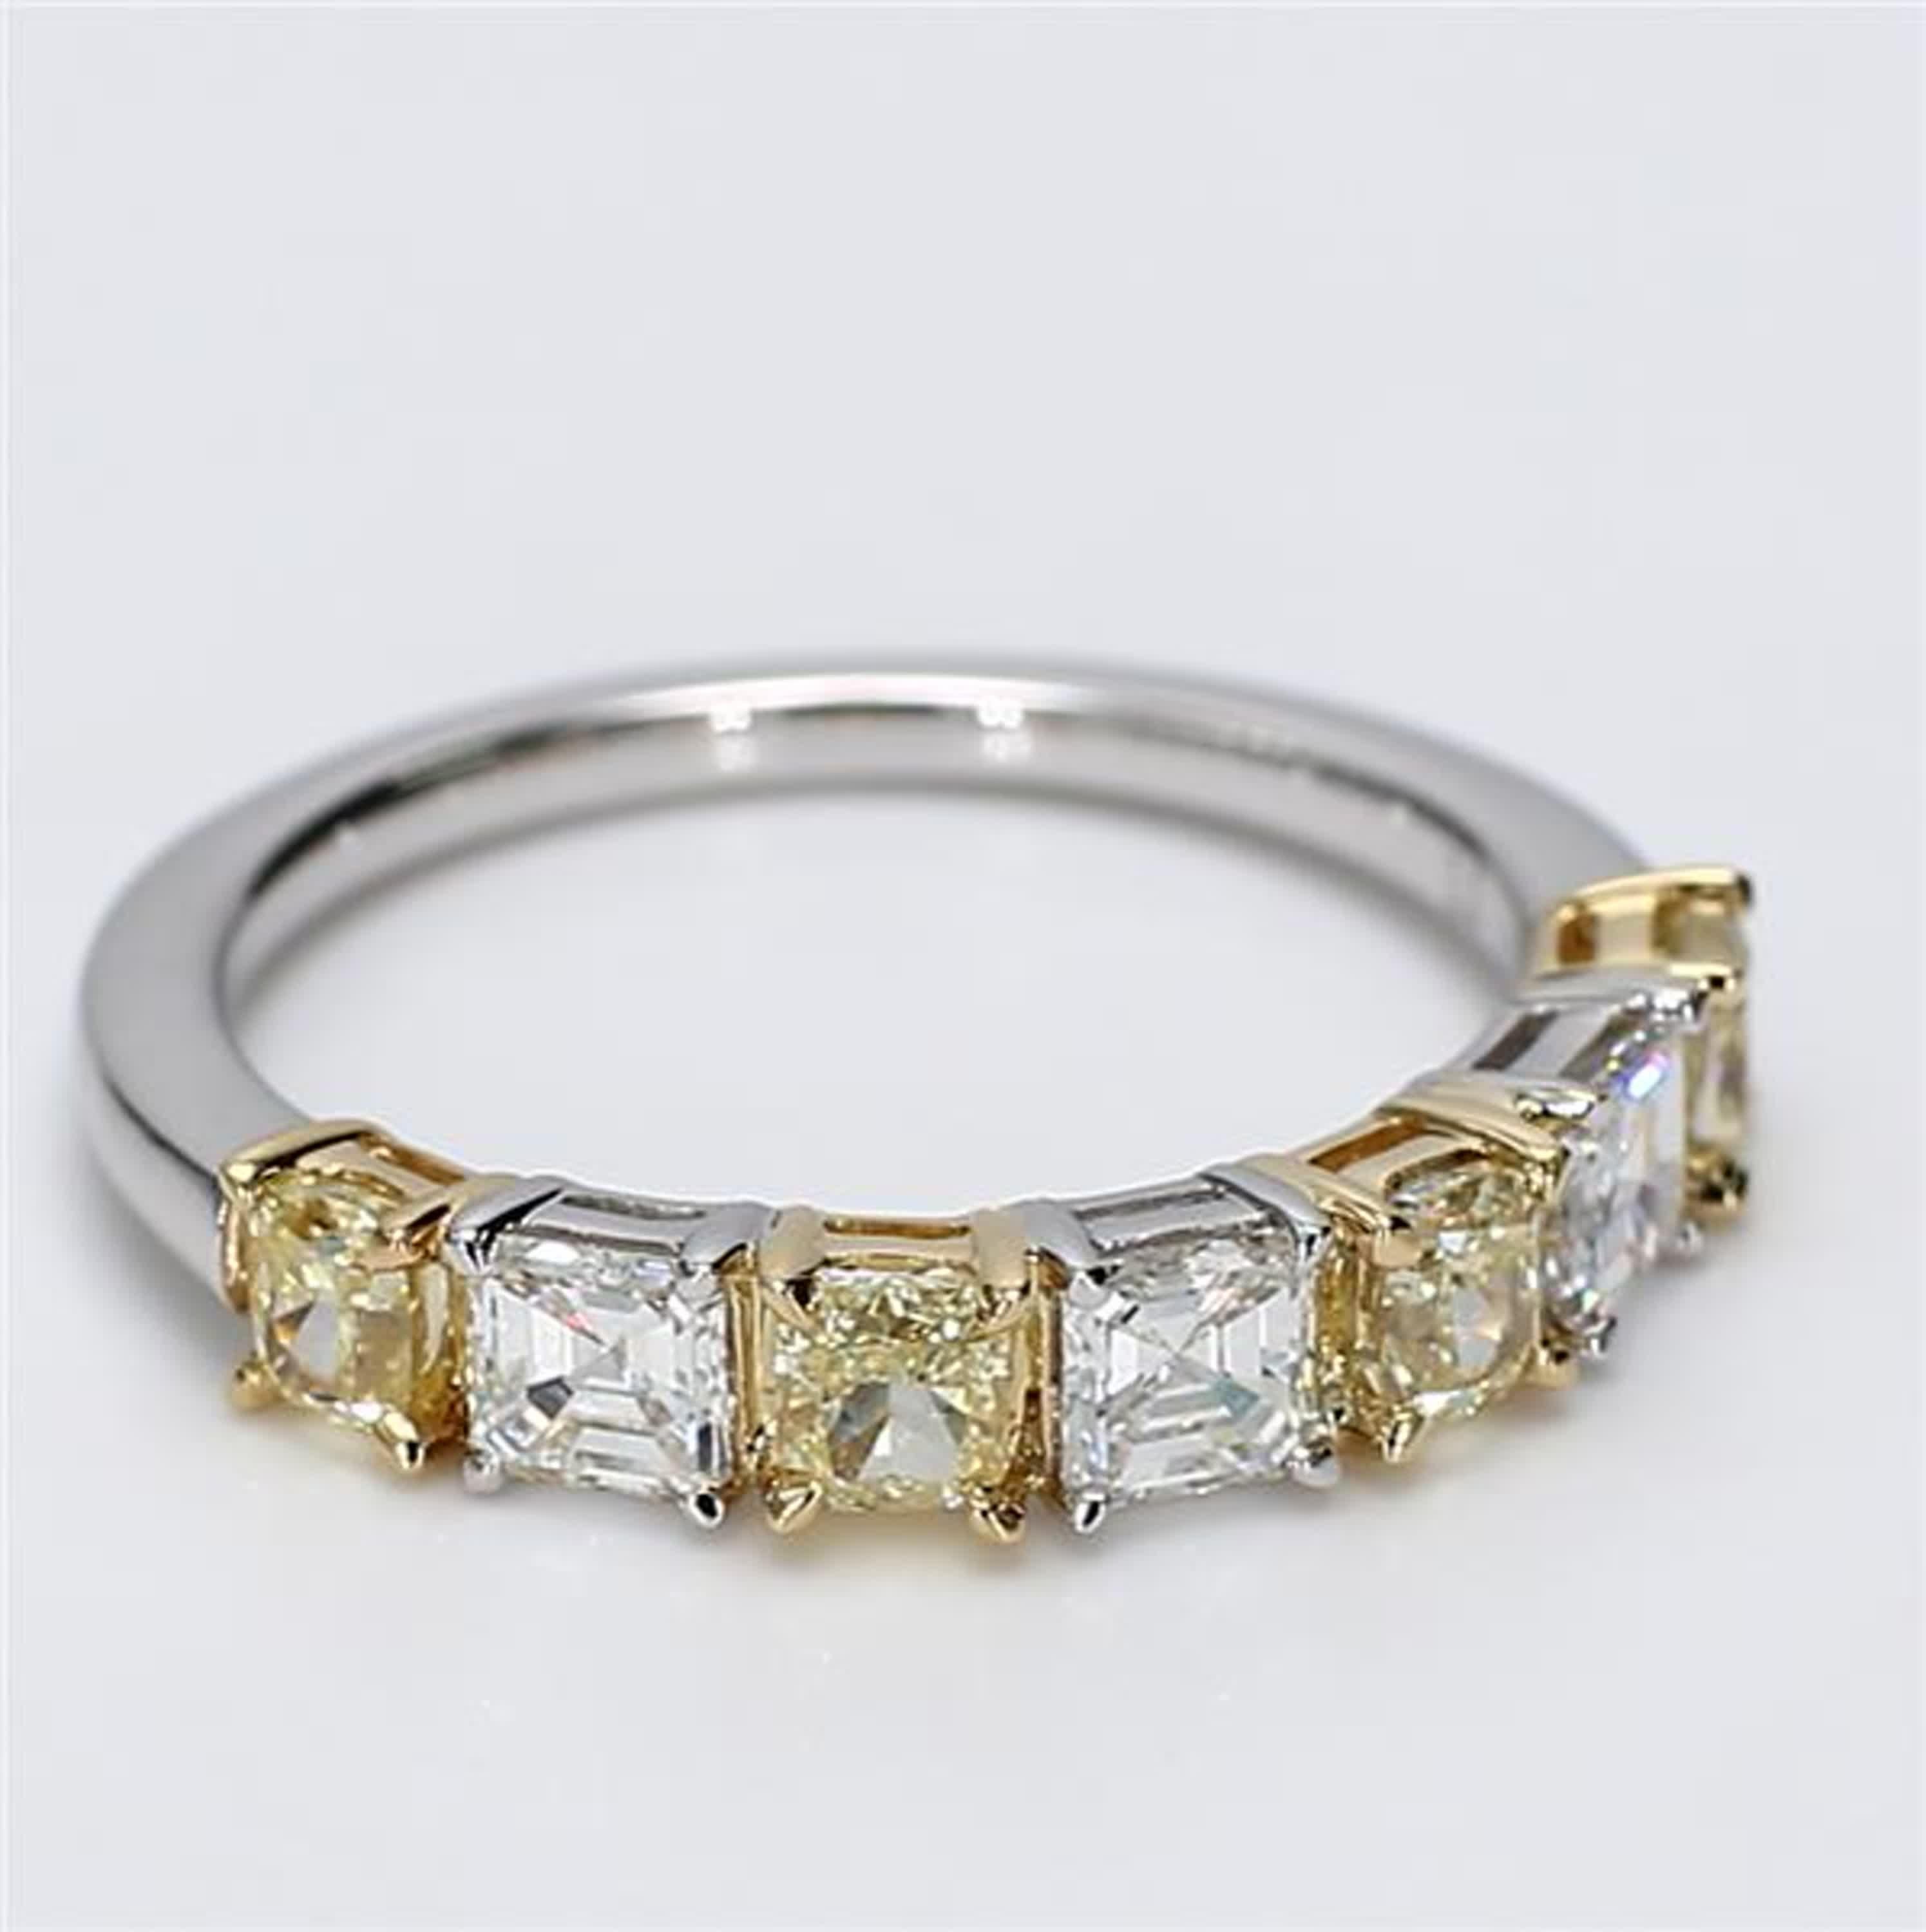 RareGemWorld's classic diamond band. Mounted in a beautiful 18K Yellow and White Gold setting with natural cushion cut yellow diamonds complimented by natural asscher cut white diamonds. This band is guaranteed to impress and enhance your personal